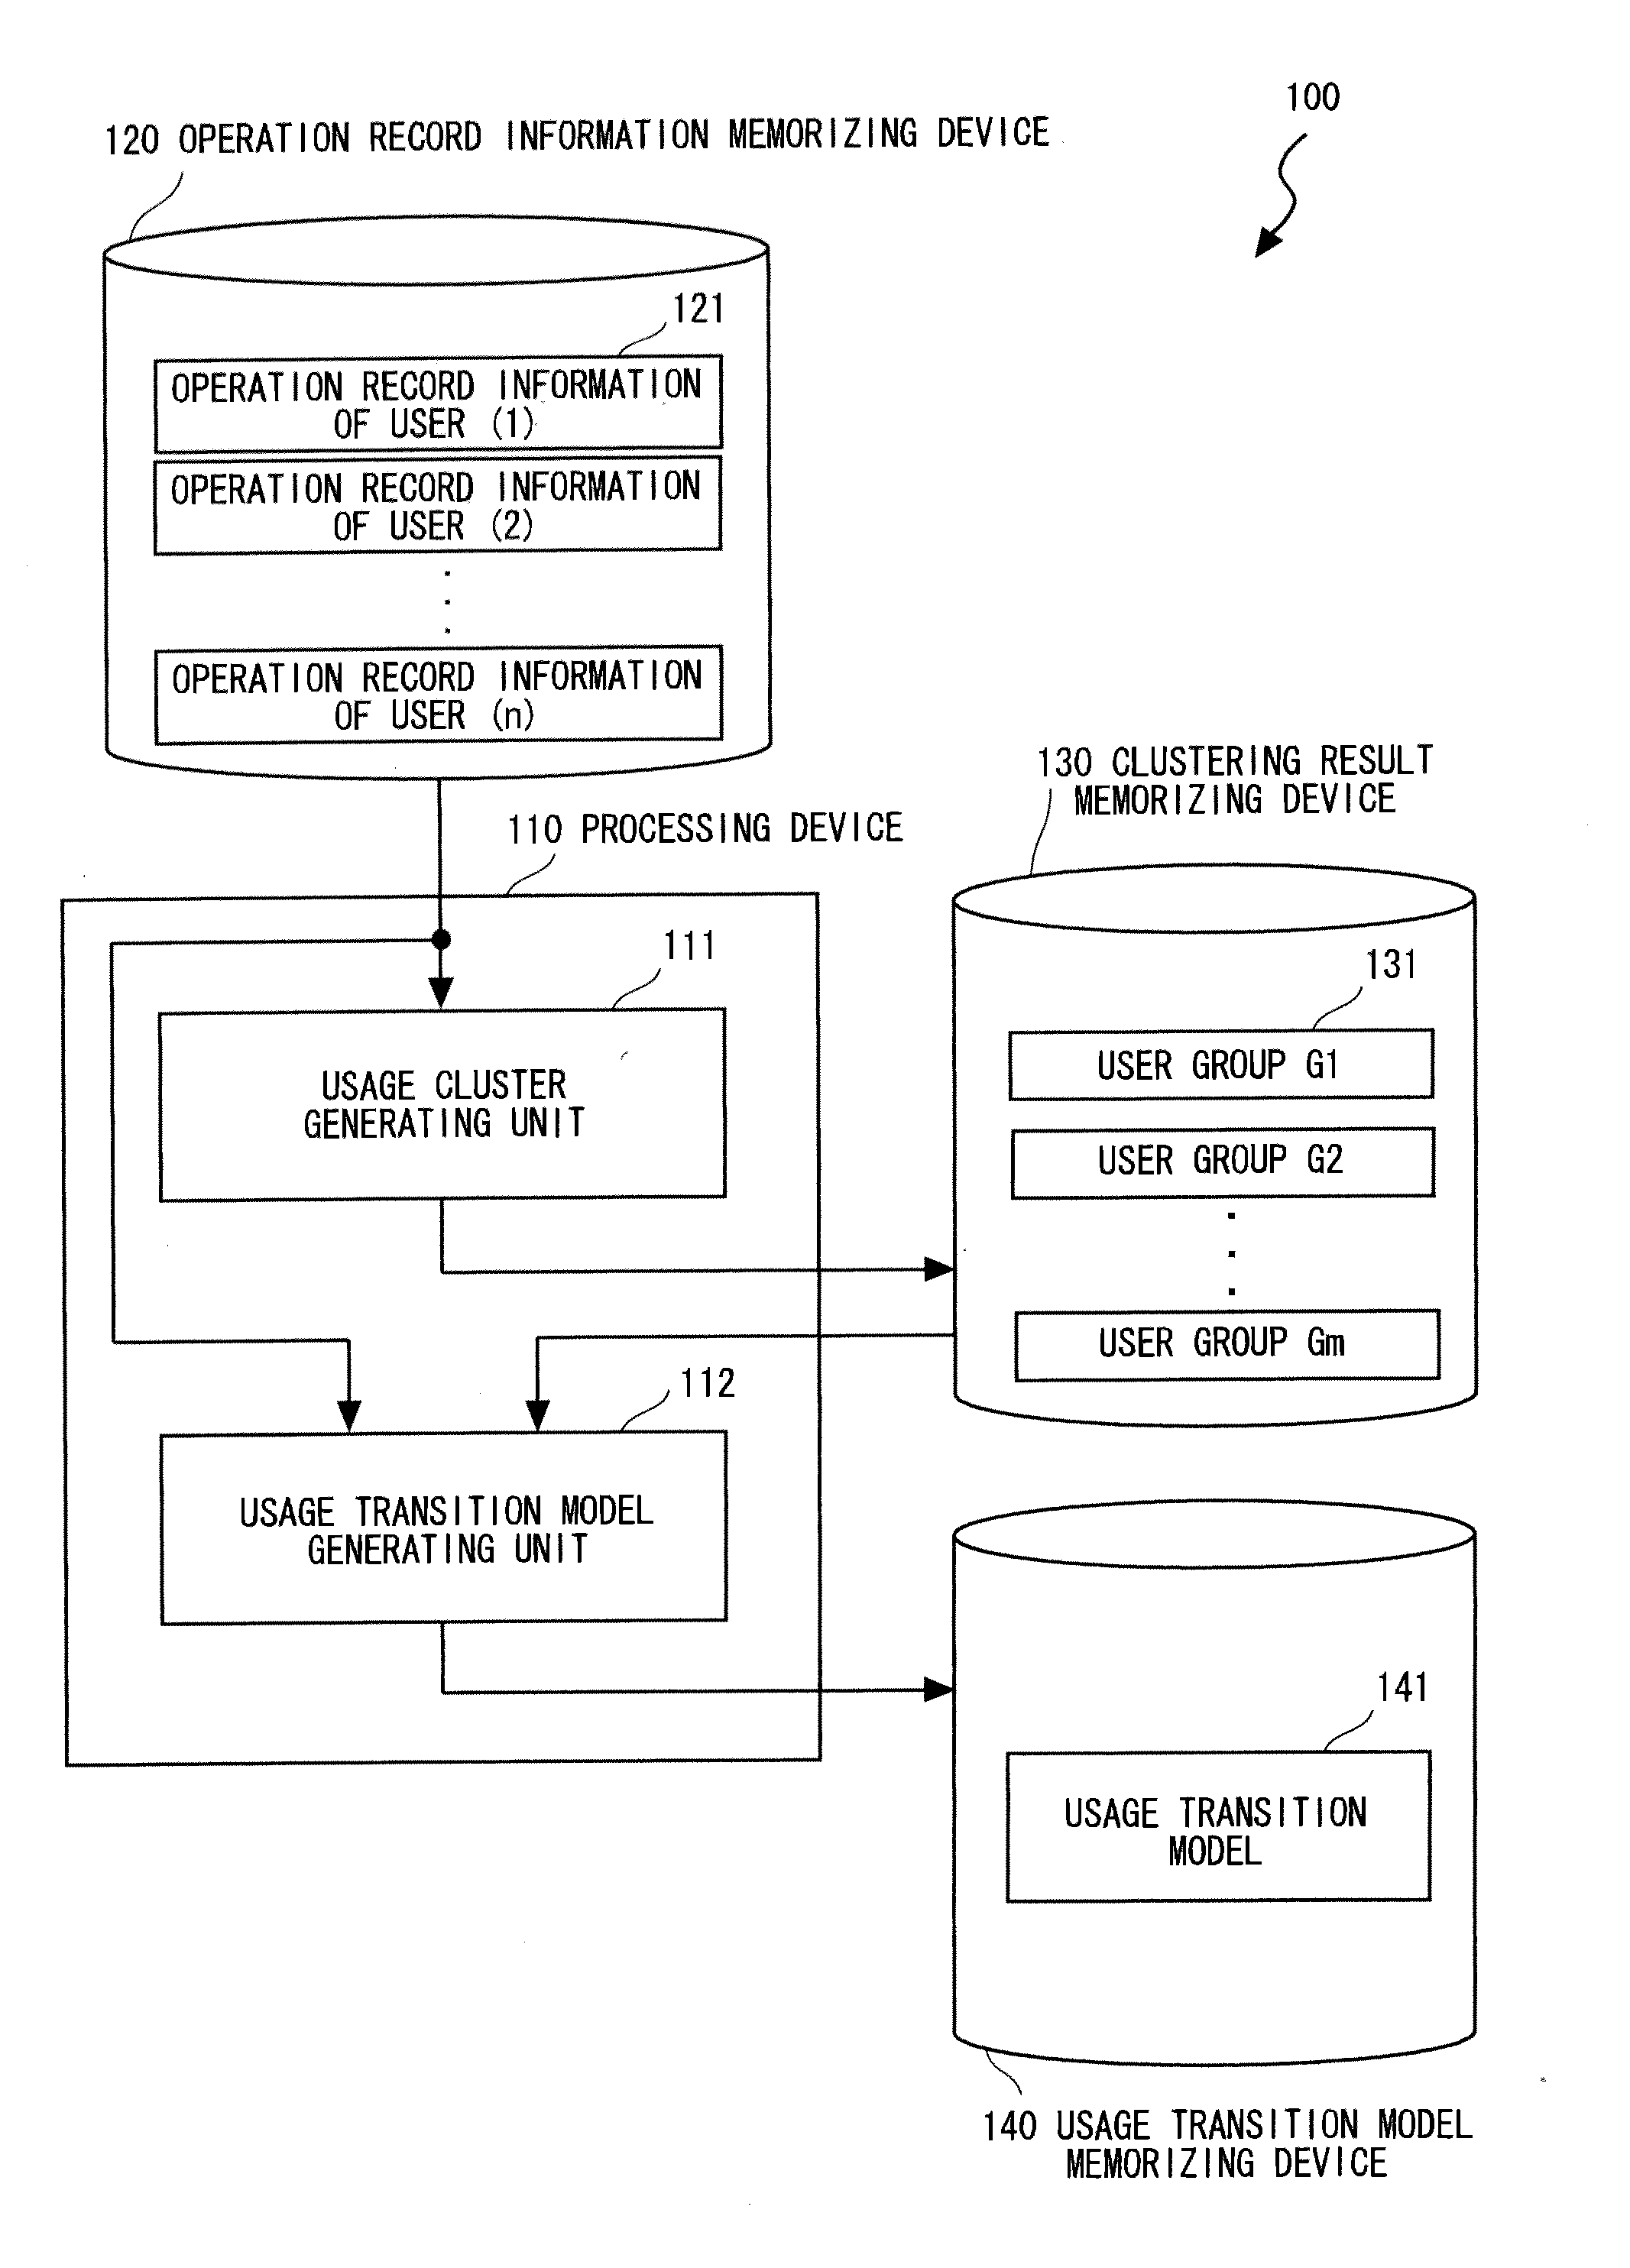 User model processing device